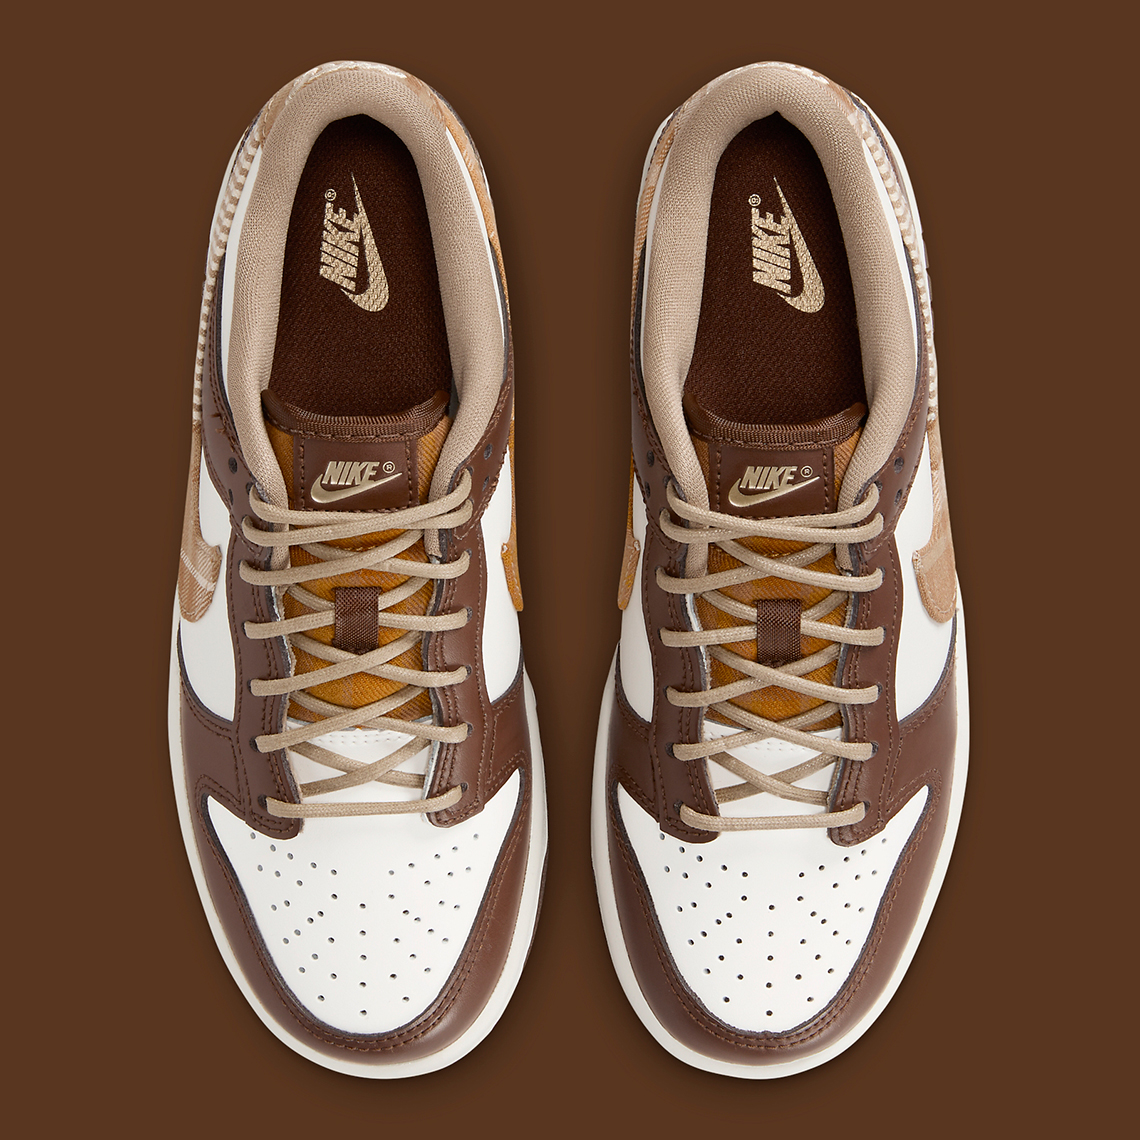 A Fashionable Brown Plaid Accents This Nike Dunk Low For Fall/Winter ...